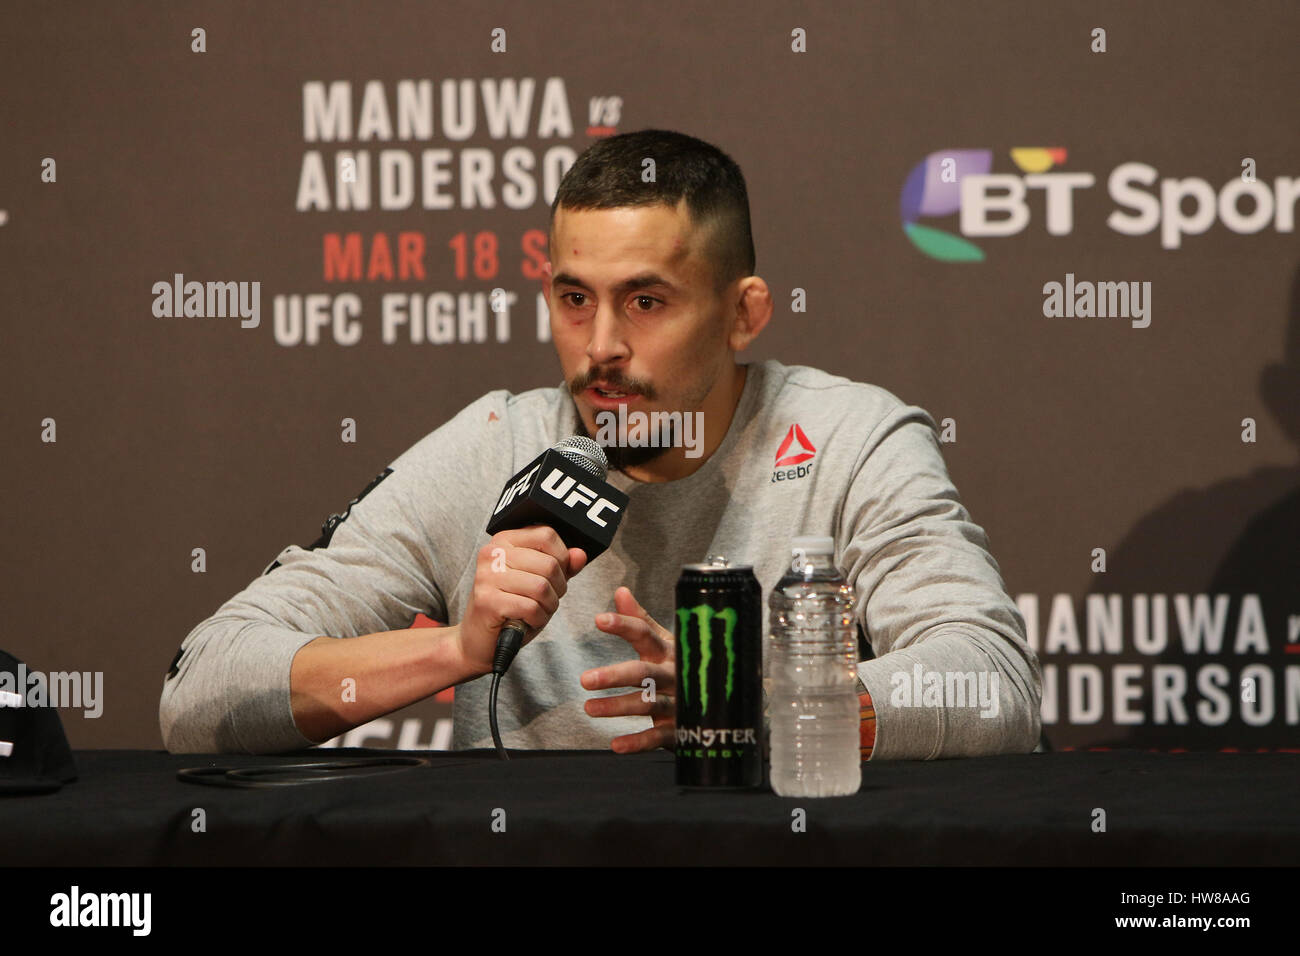 O2 Arena , London, England. 18 March 2017. Marlon Vera takes questions from the press in the post fight press conference during UFC Fight Night 107: London  Credit: Dan Cooke/Alamy Live News Stock Photo